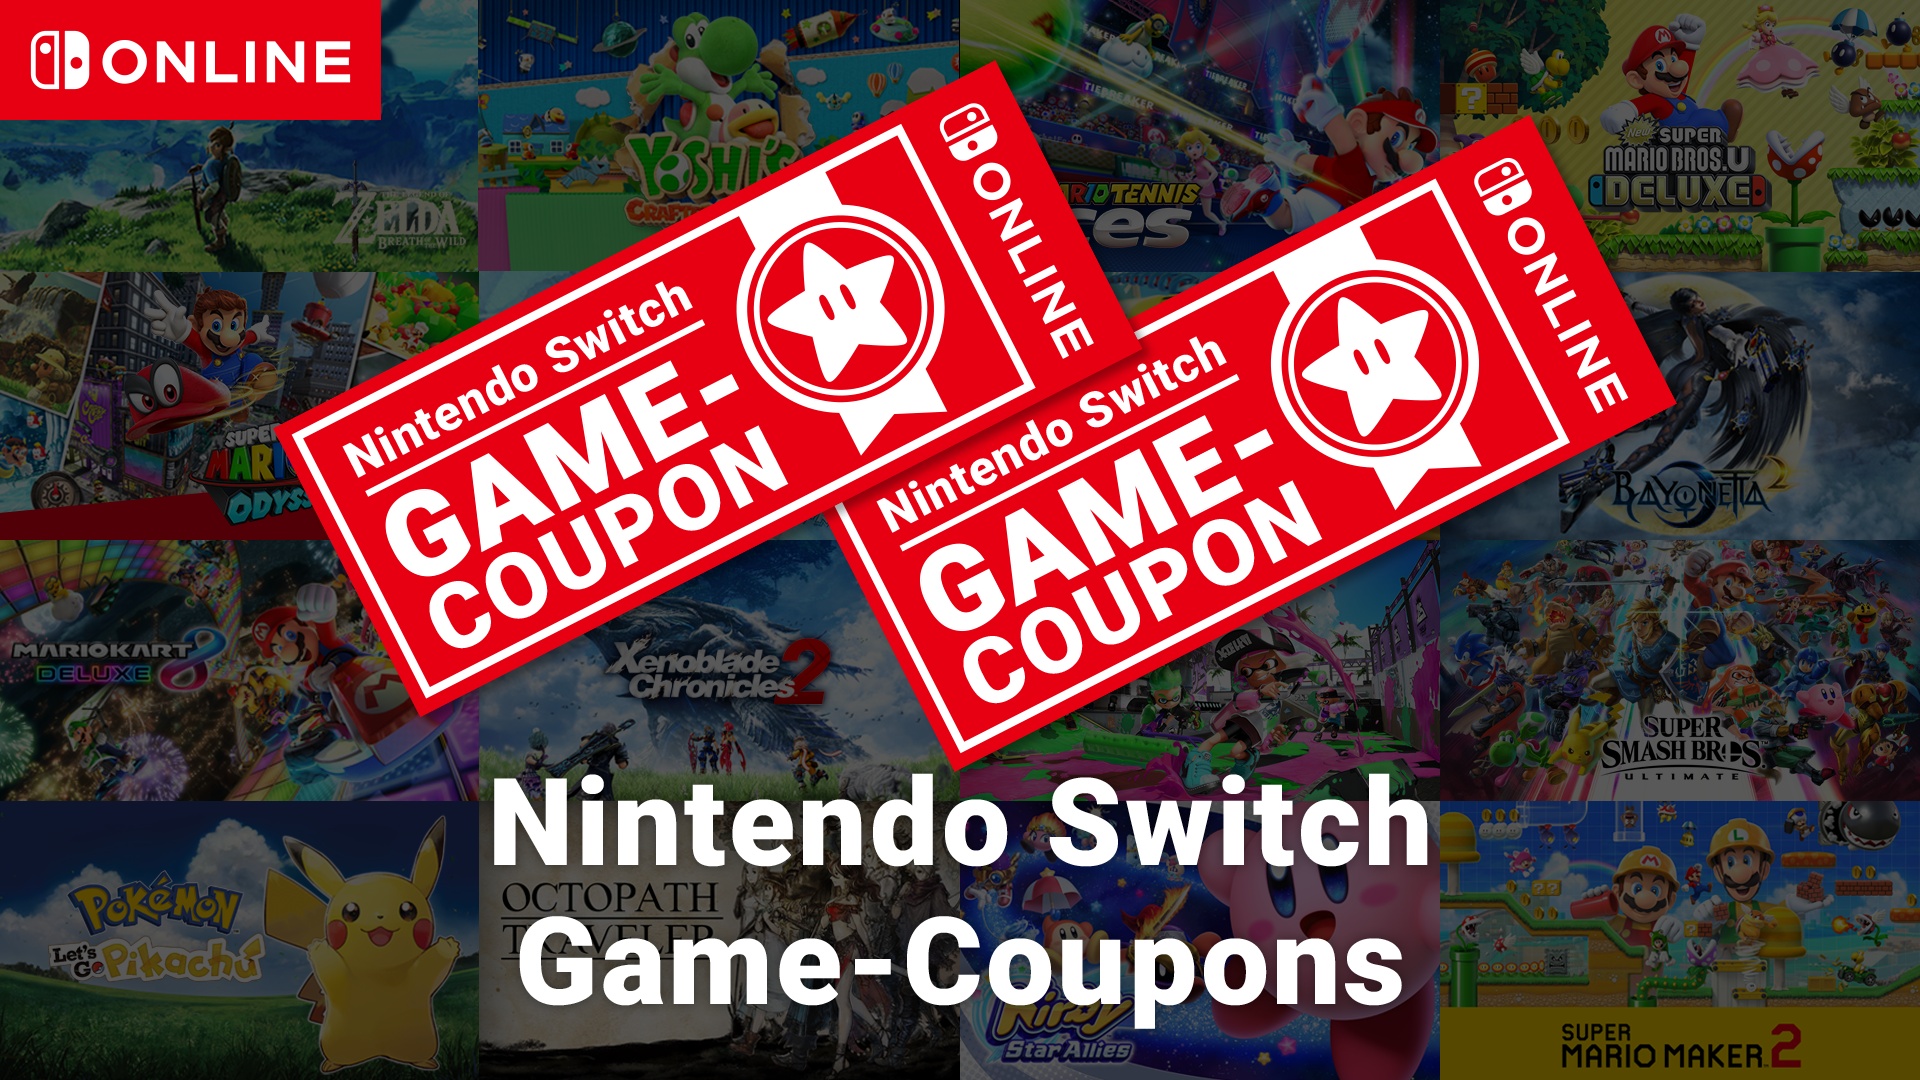 Nintendo Switch Online Coupons